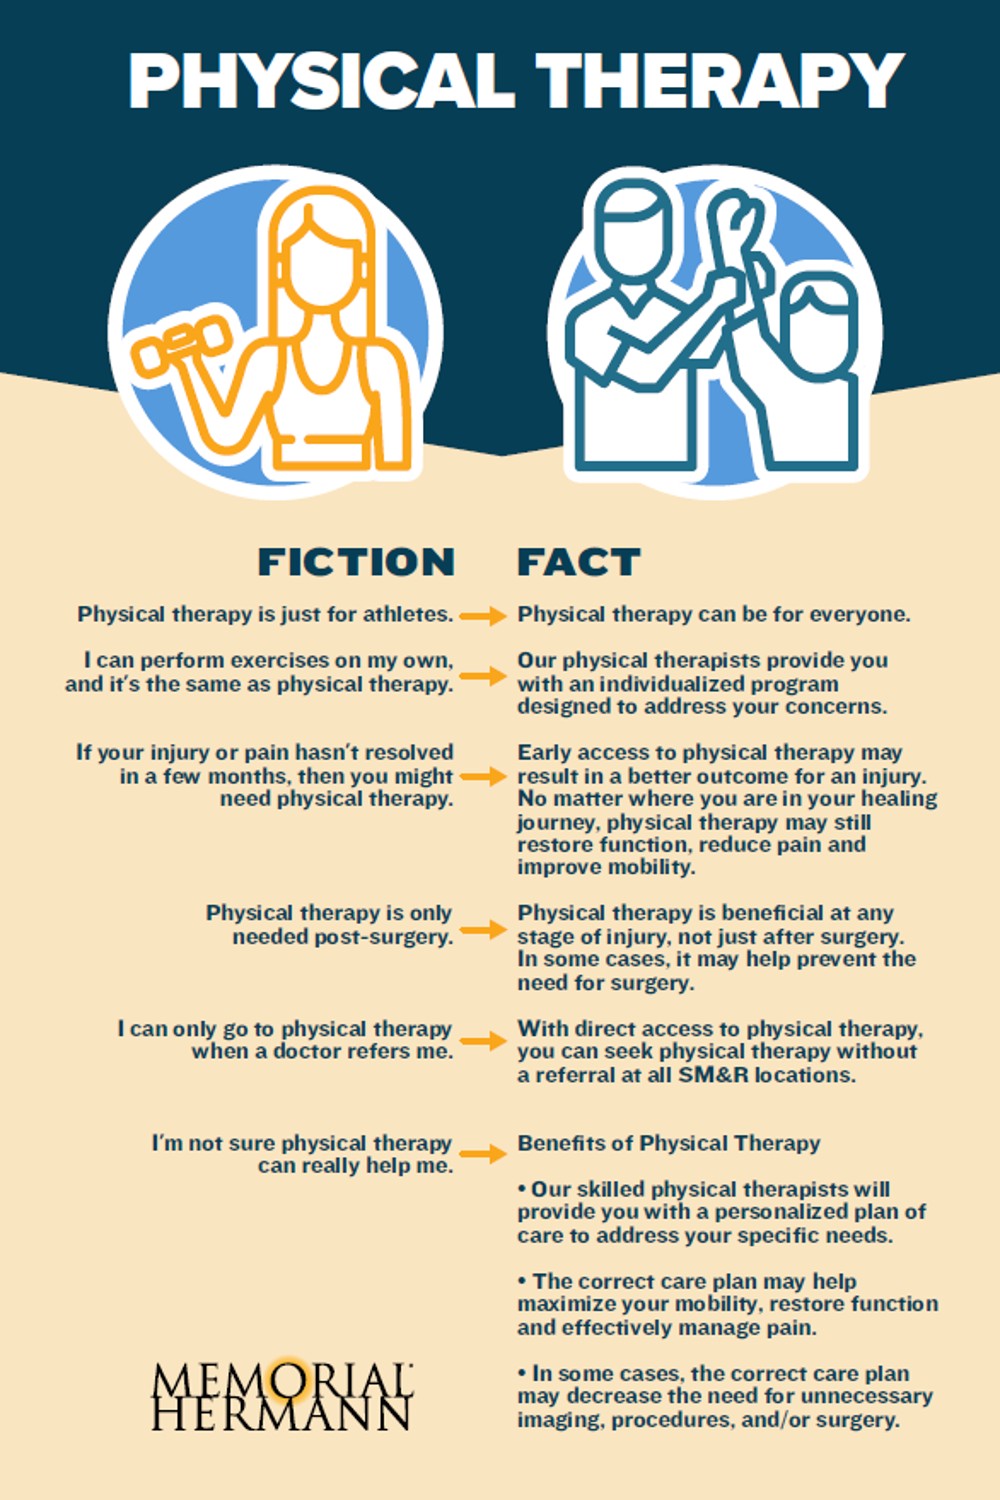 Physical Therapy Fact vs. Fiction